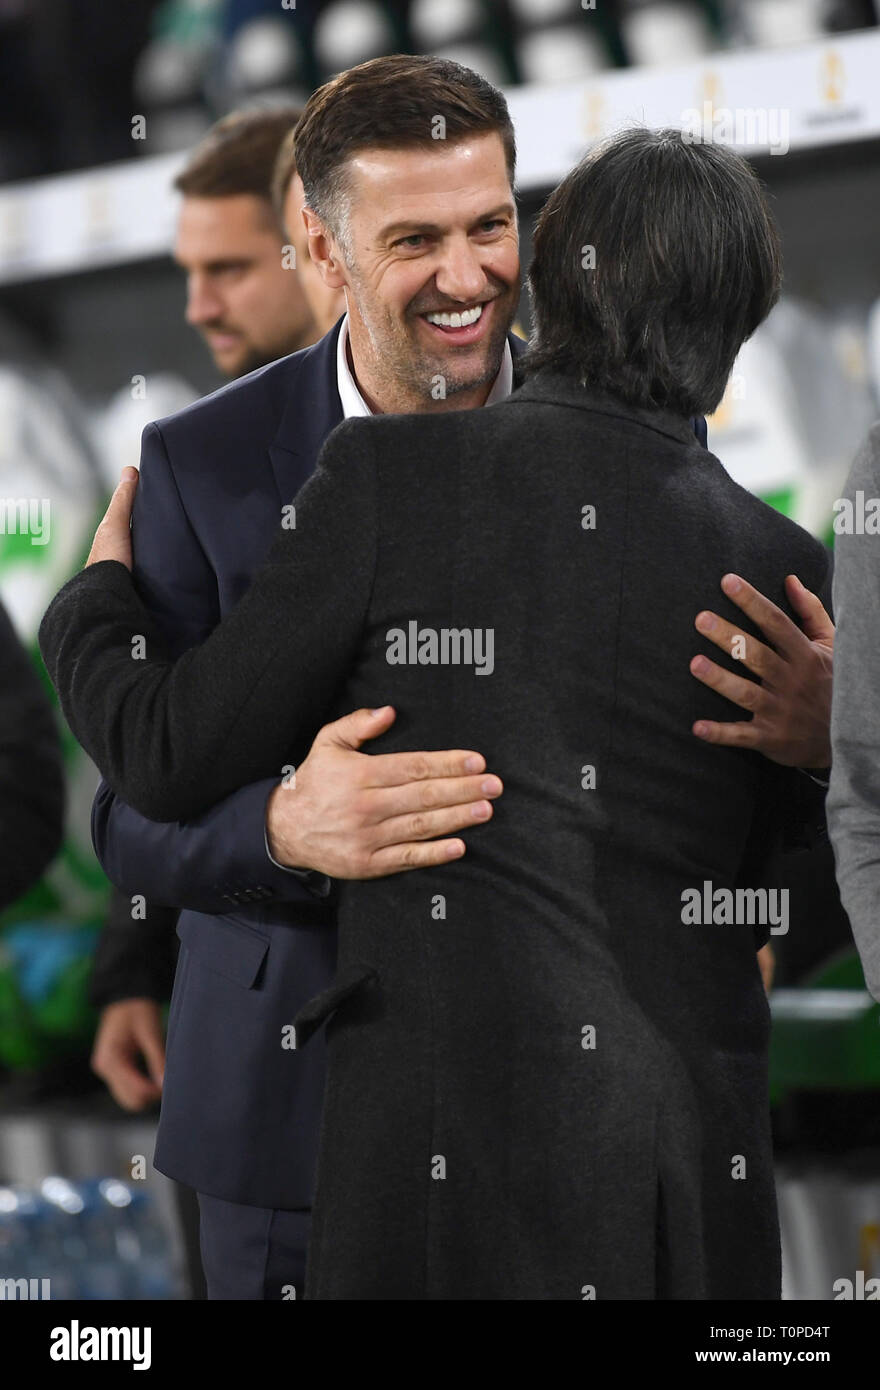 20 March 2019, Lower Saxony, Wolfsburg: Soccer: International match, Germany - Serbia in the Volkswagen Arena. Serbia coach Mladen Krstajic (l) welcomes national coach Joachim Löw before the match. Photo: Peter Steffen/dpa Stock Photo